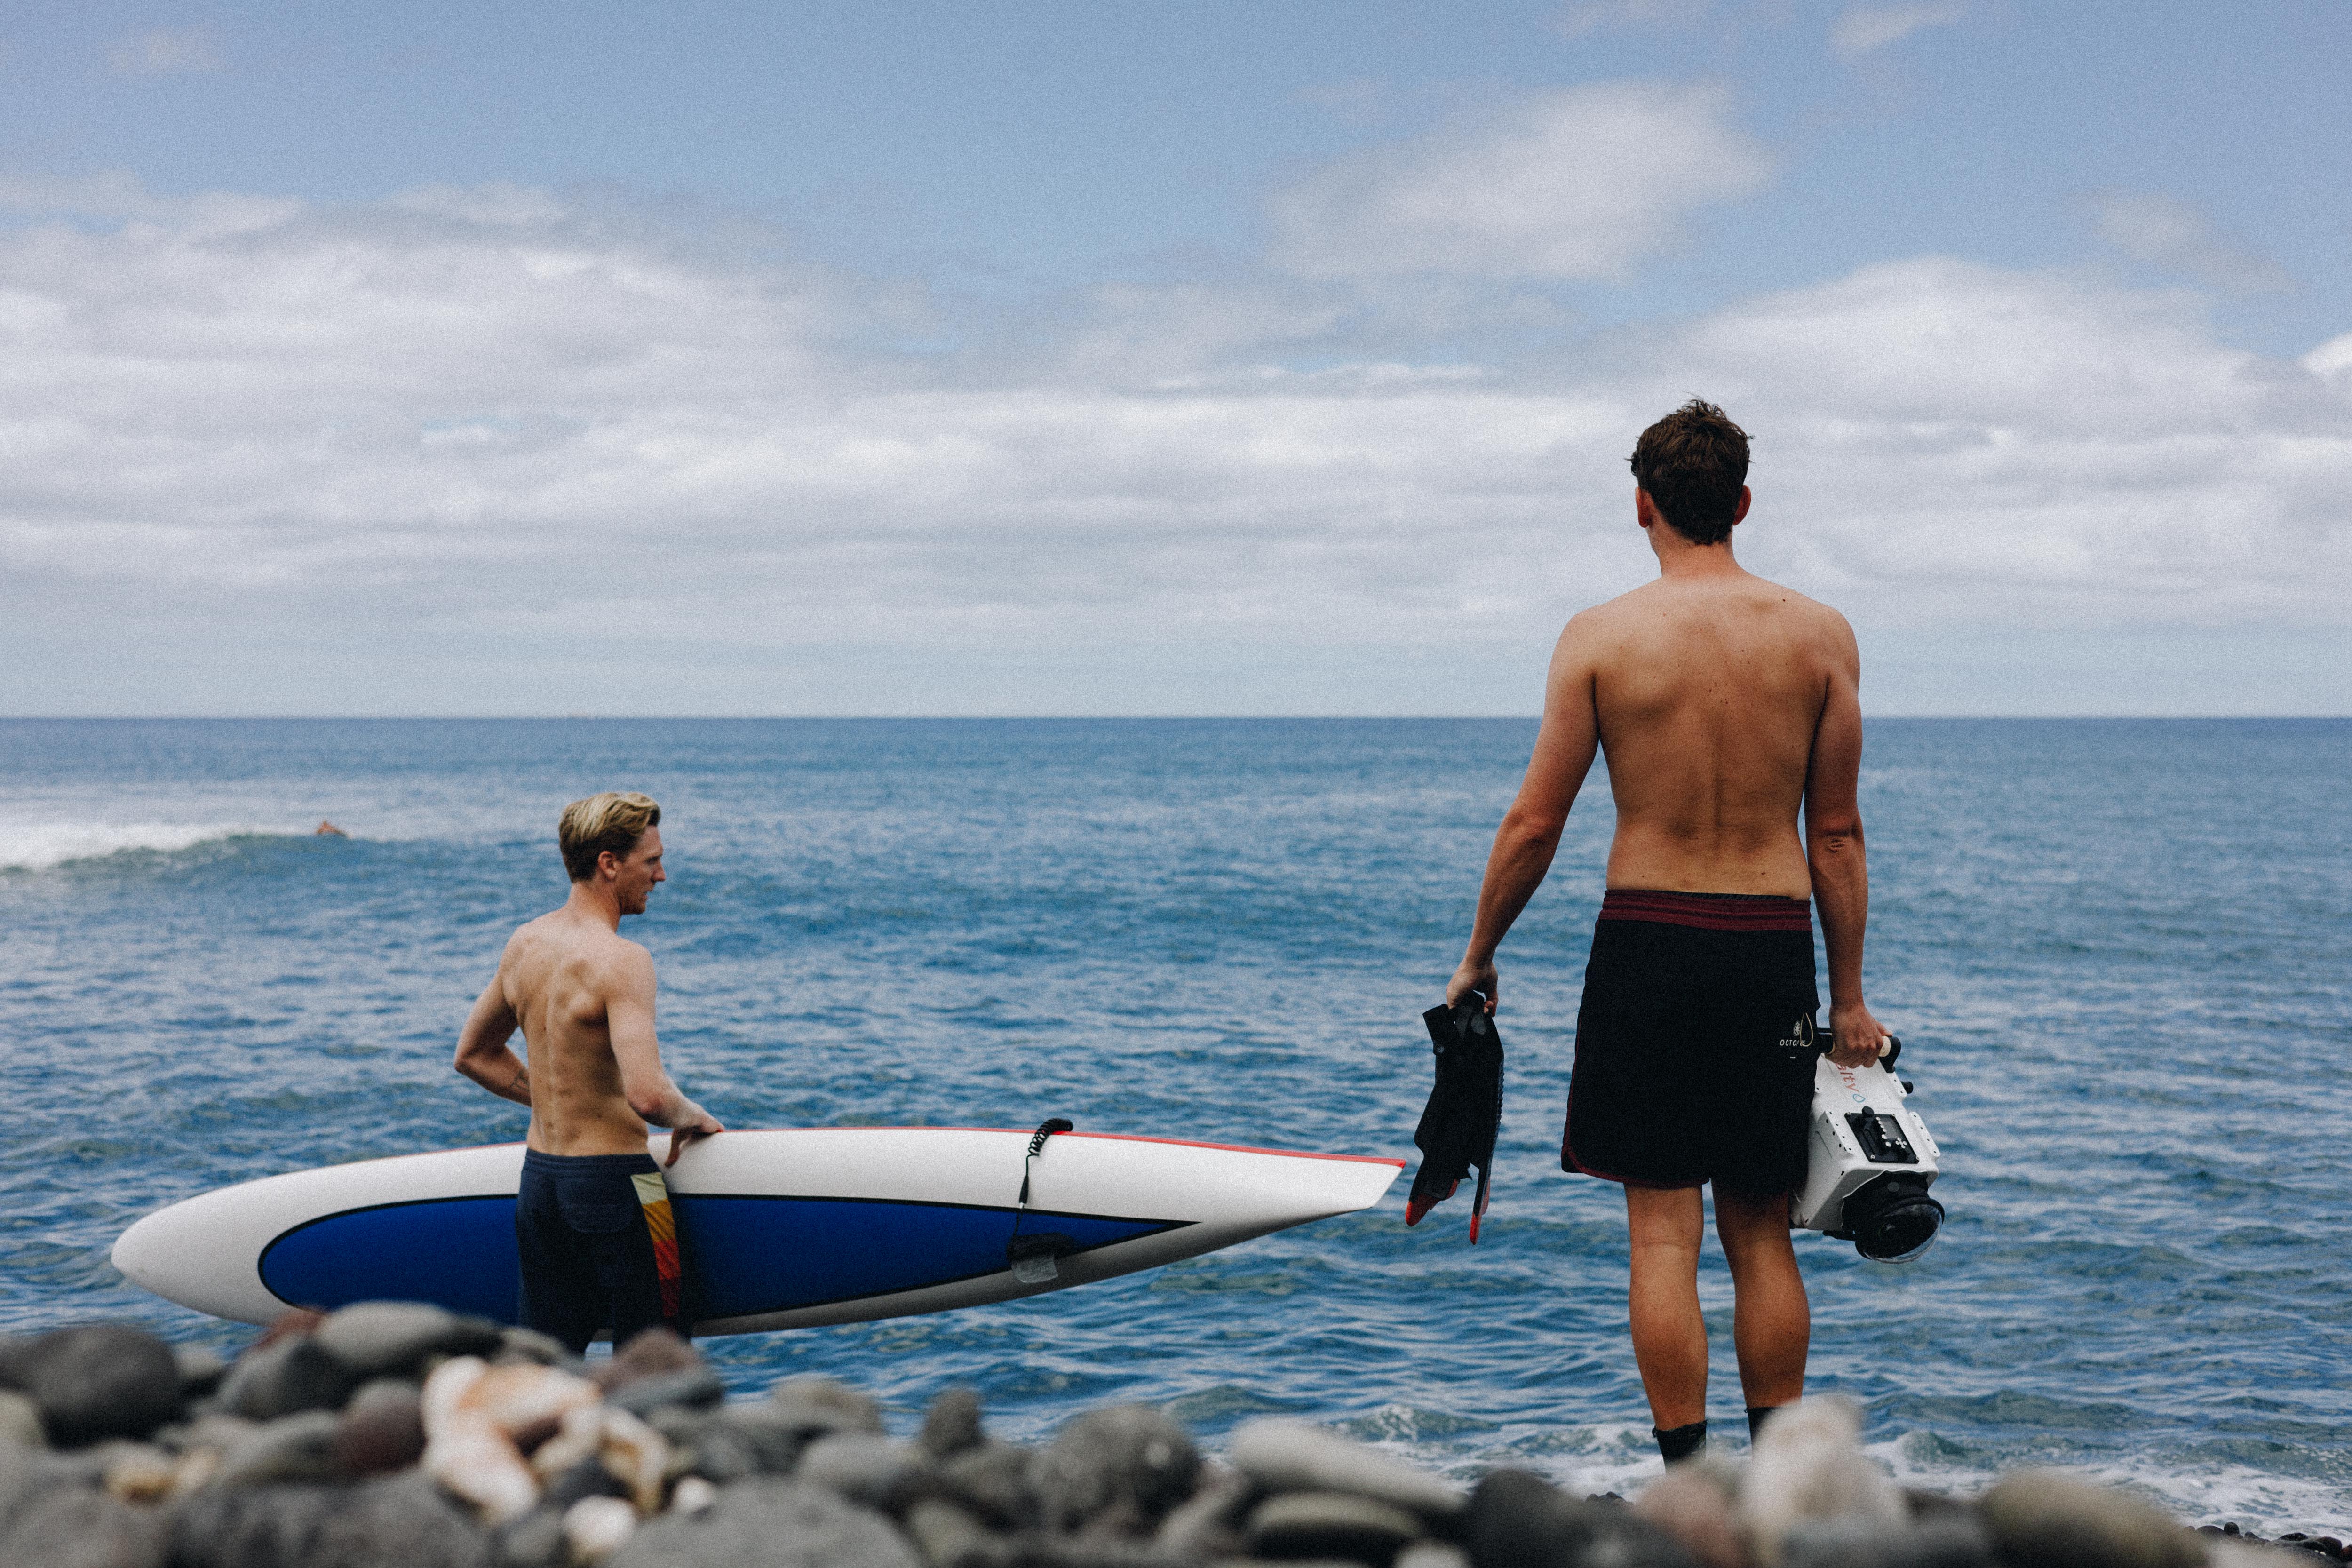 Brett Connellan is standing in the ocean with a large paddleboard. A man is on his right holding a navigation device.